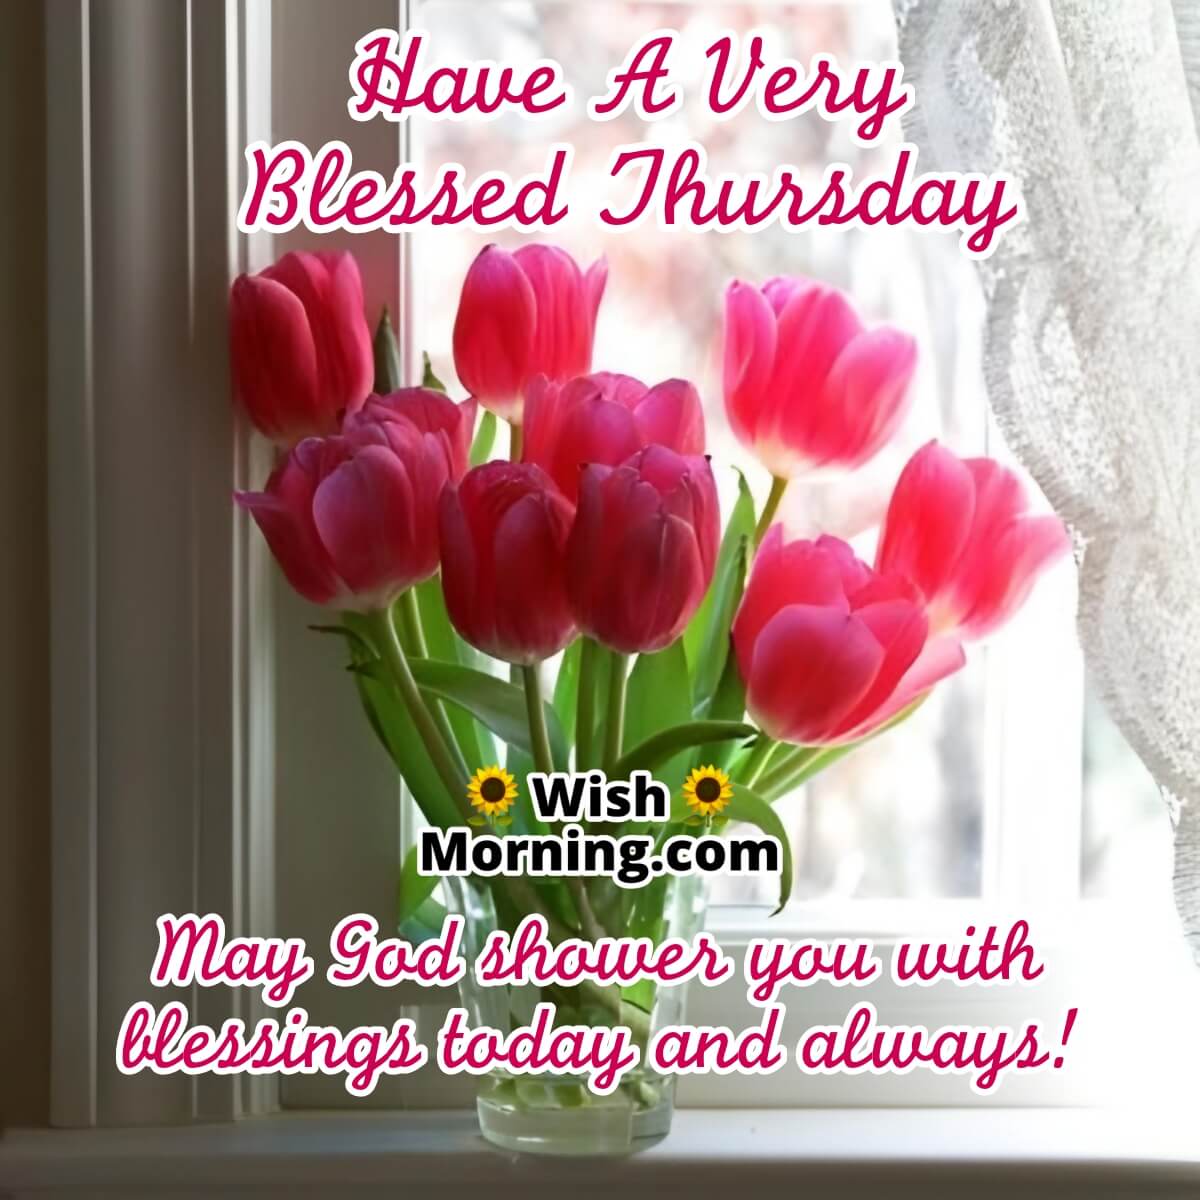 Have A Very Blessed Thursday